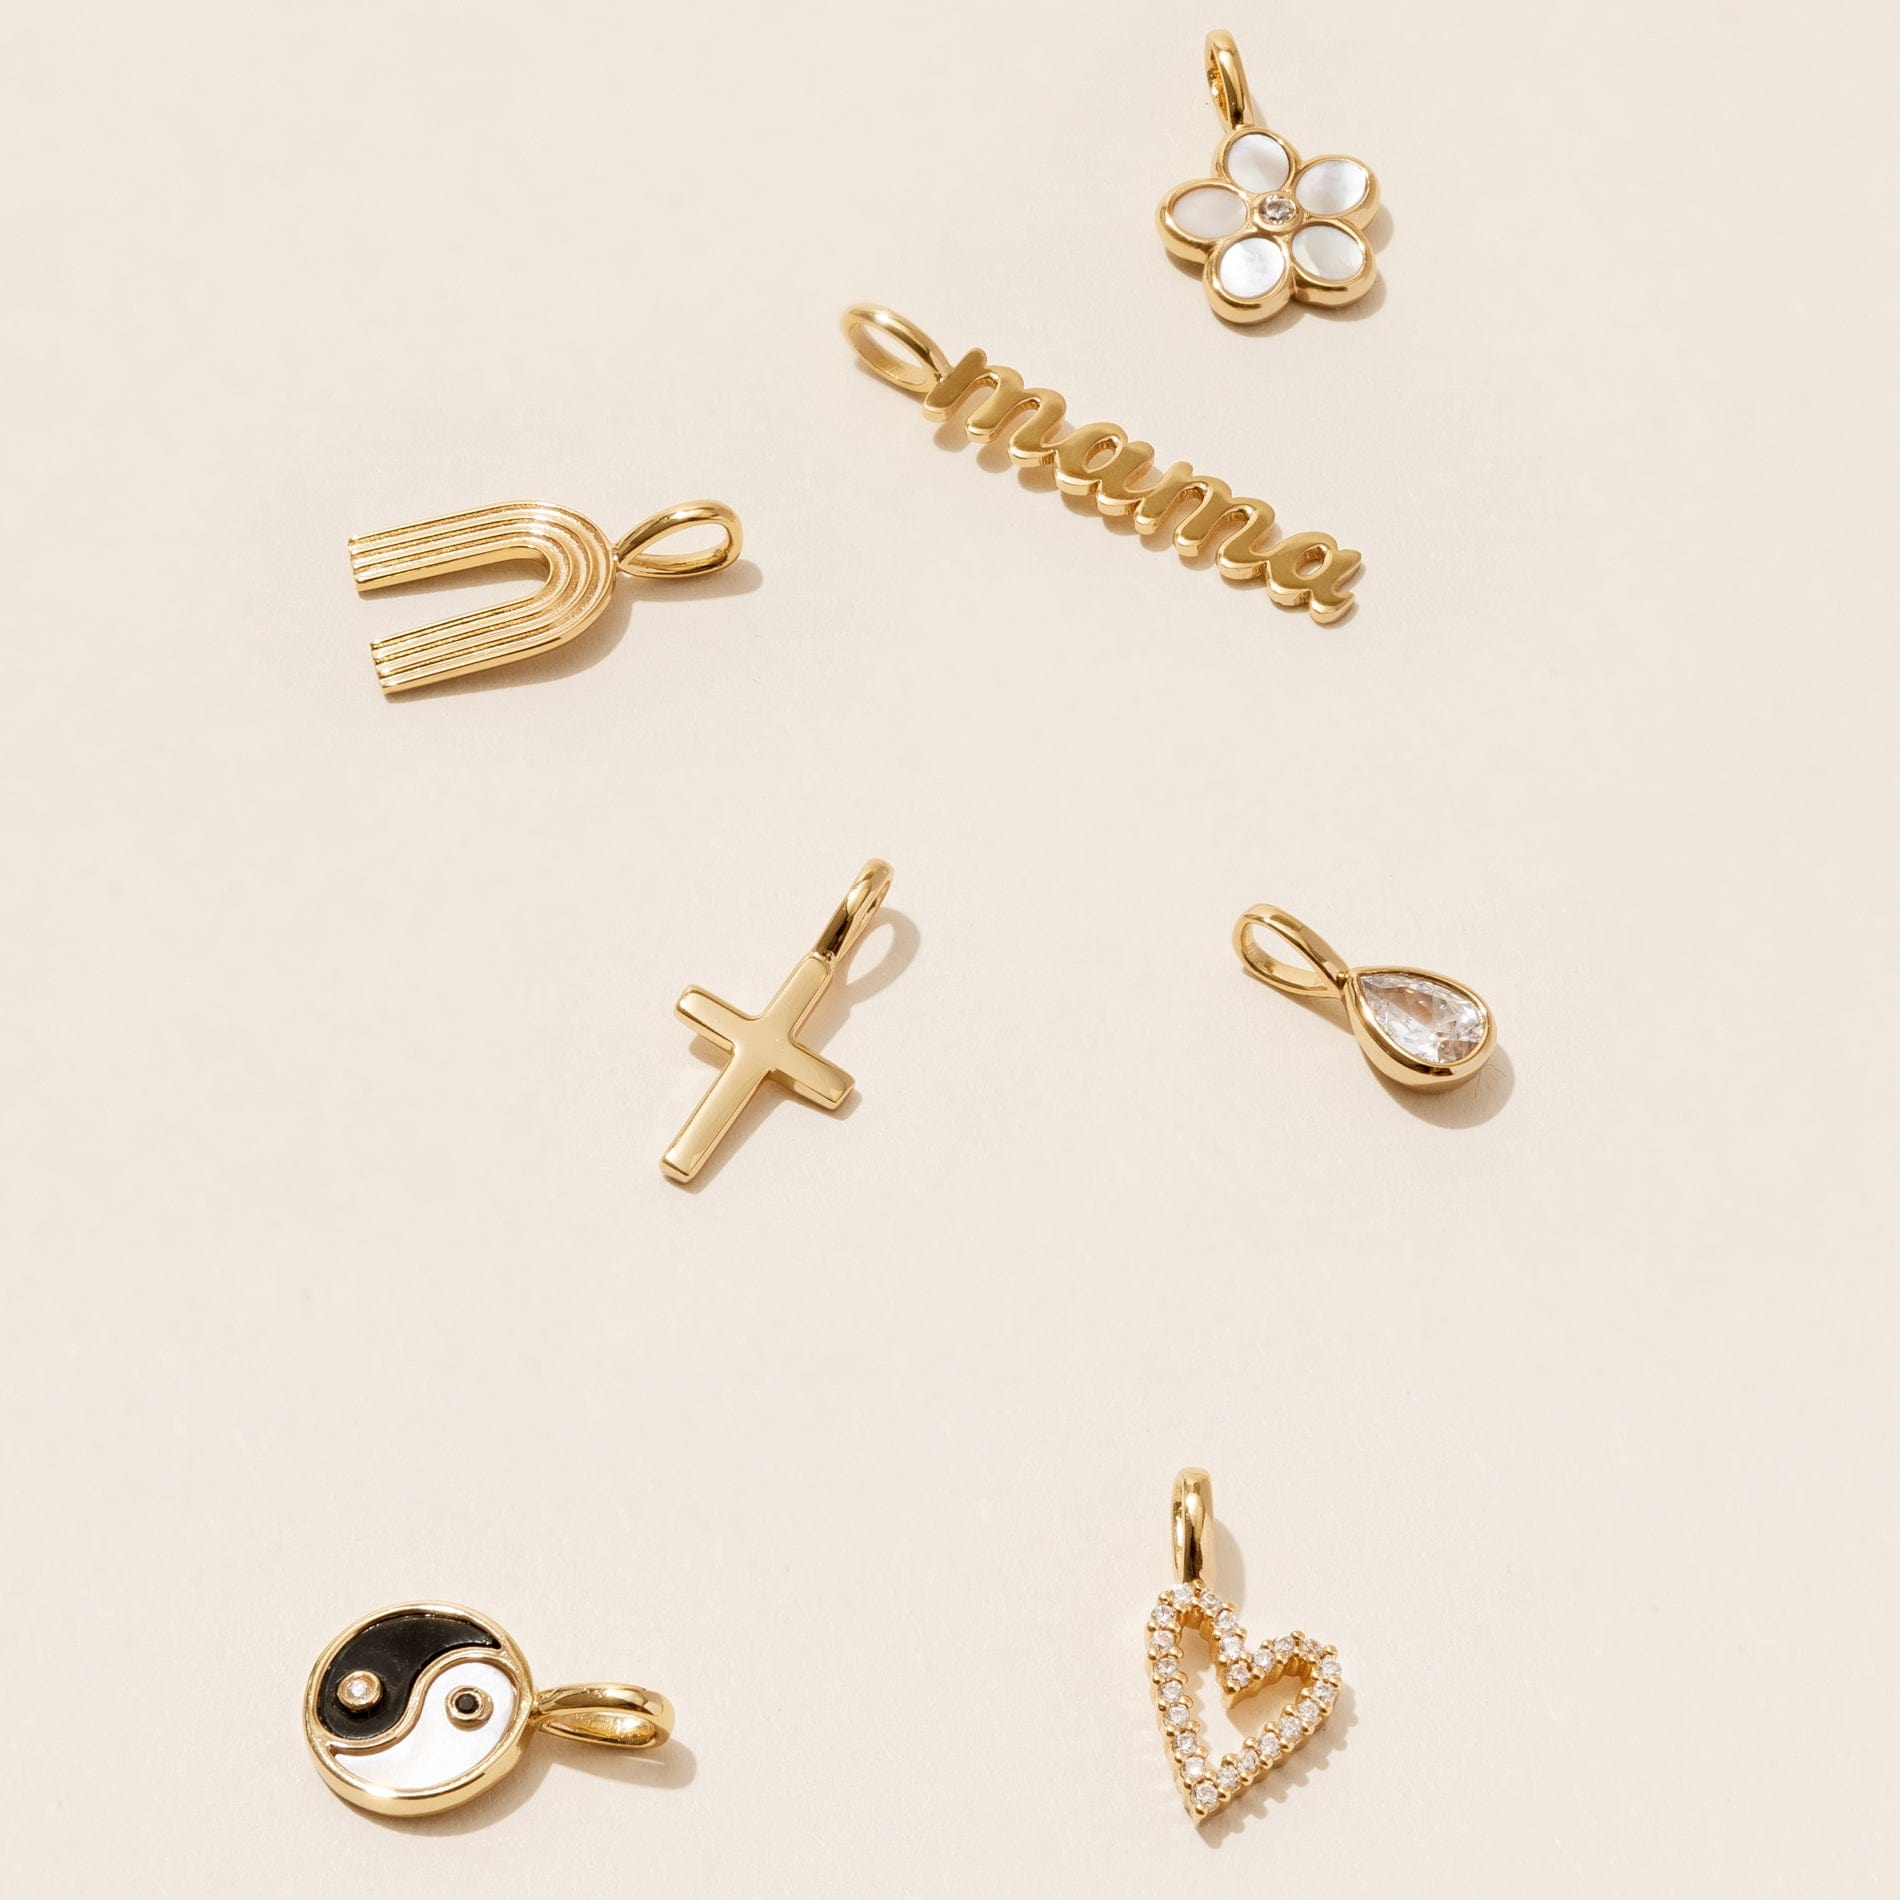 Handmade Ancient Alloy Cross Gold Cross Charm For DIY Jewelry Making From  Cambay_jewelry, $0.13